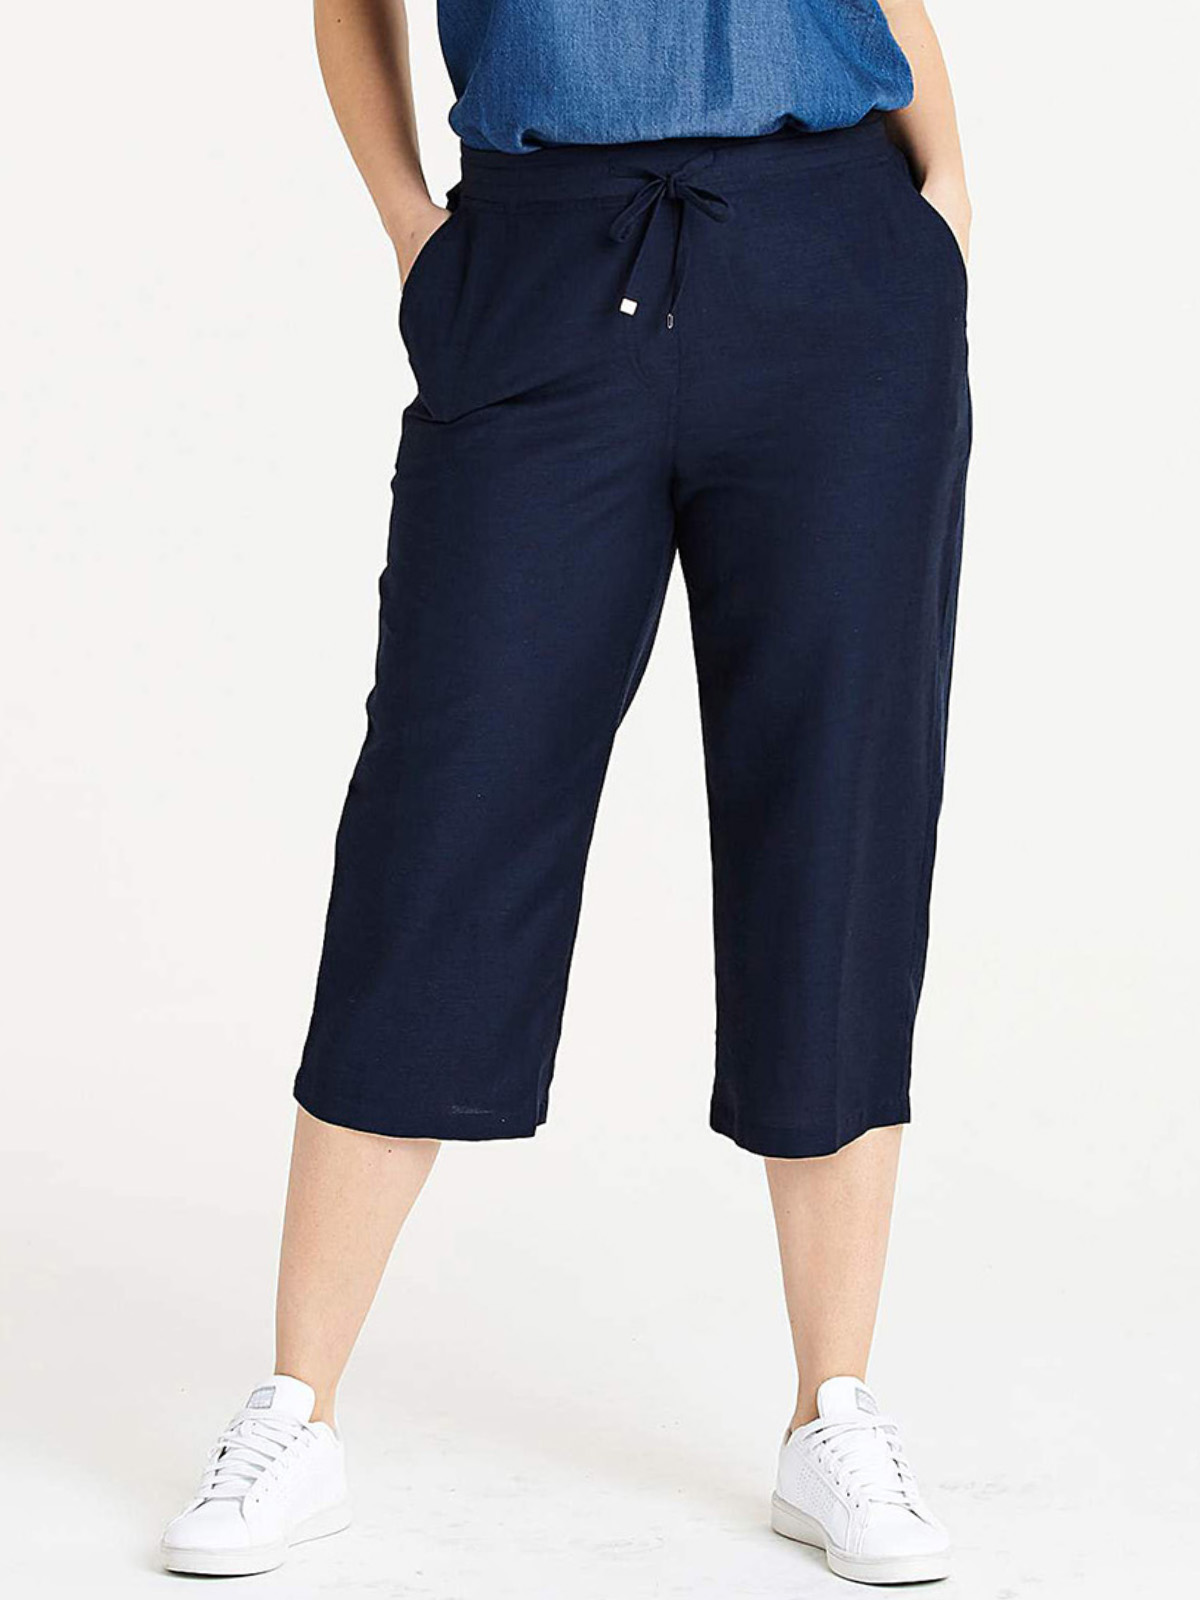 Capsule - - NAVY Linen Blend Cropped Trousers - Plus Size 12 to 30